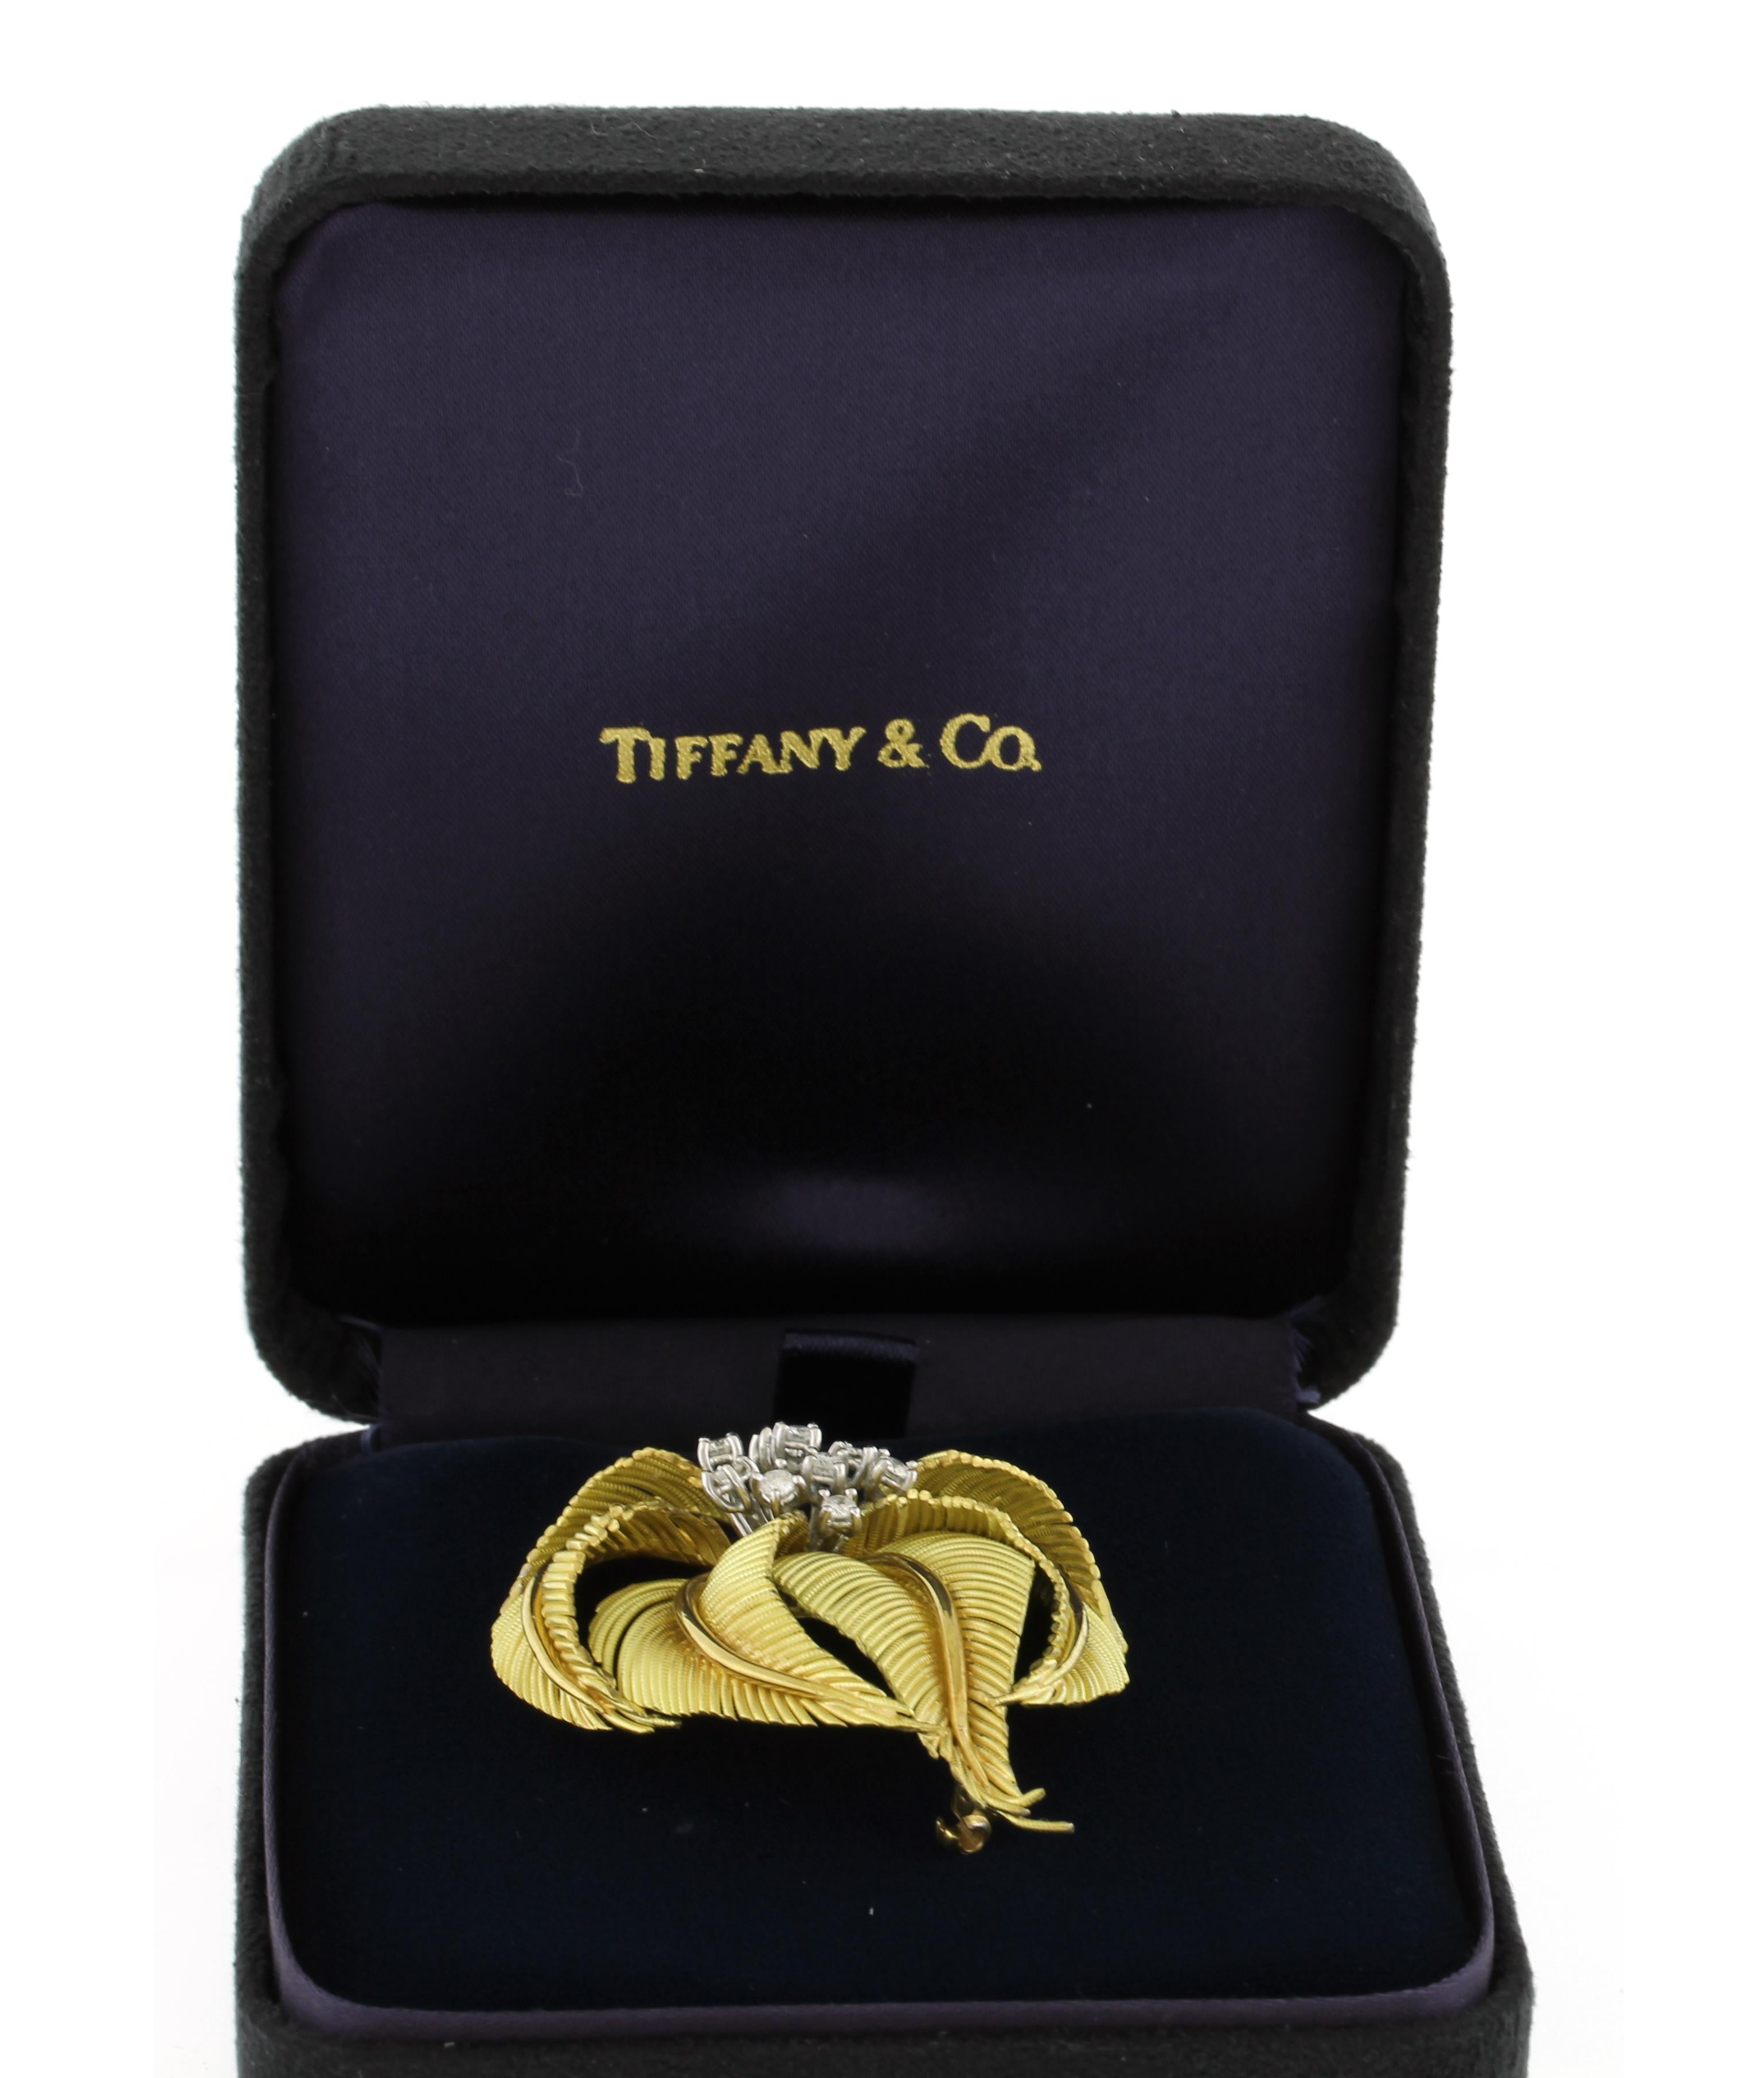 Tiffany & Co. 18kt Gold and Diamond Palm Brooch In Excellent Condition For Sale In Bethesda, MD